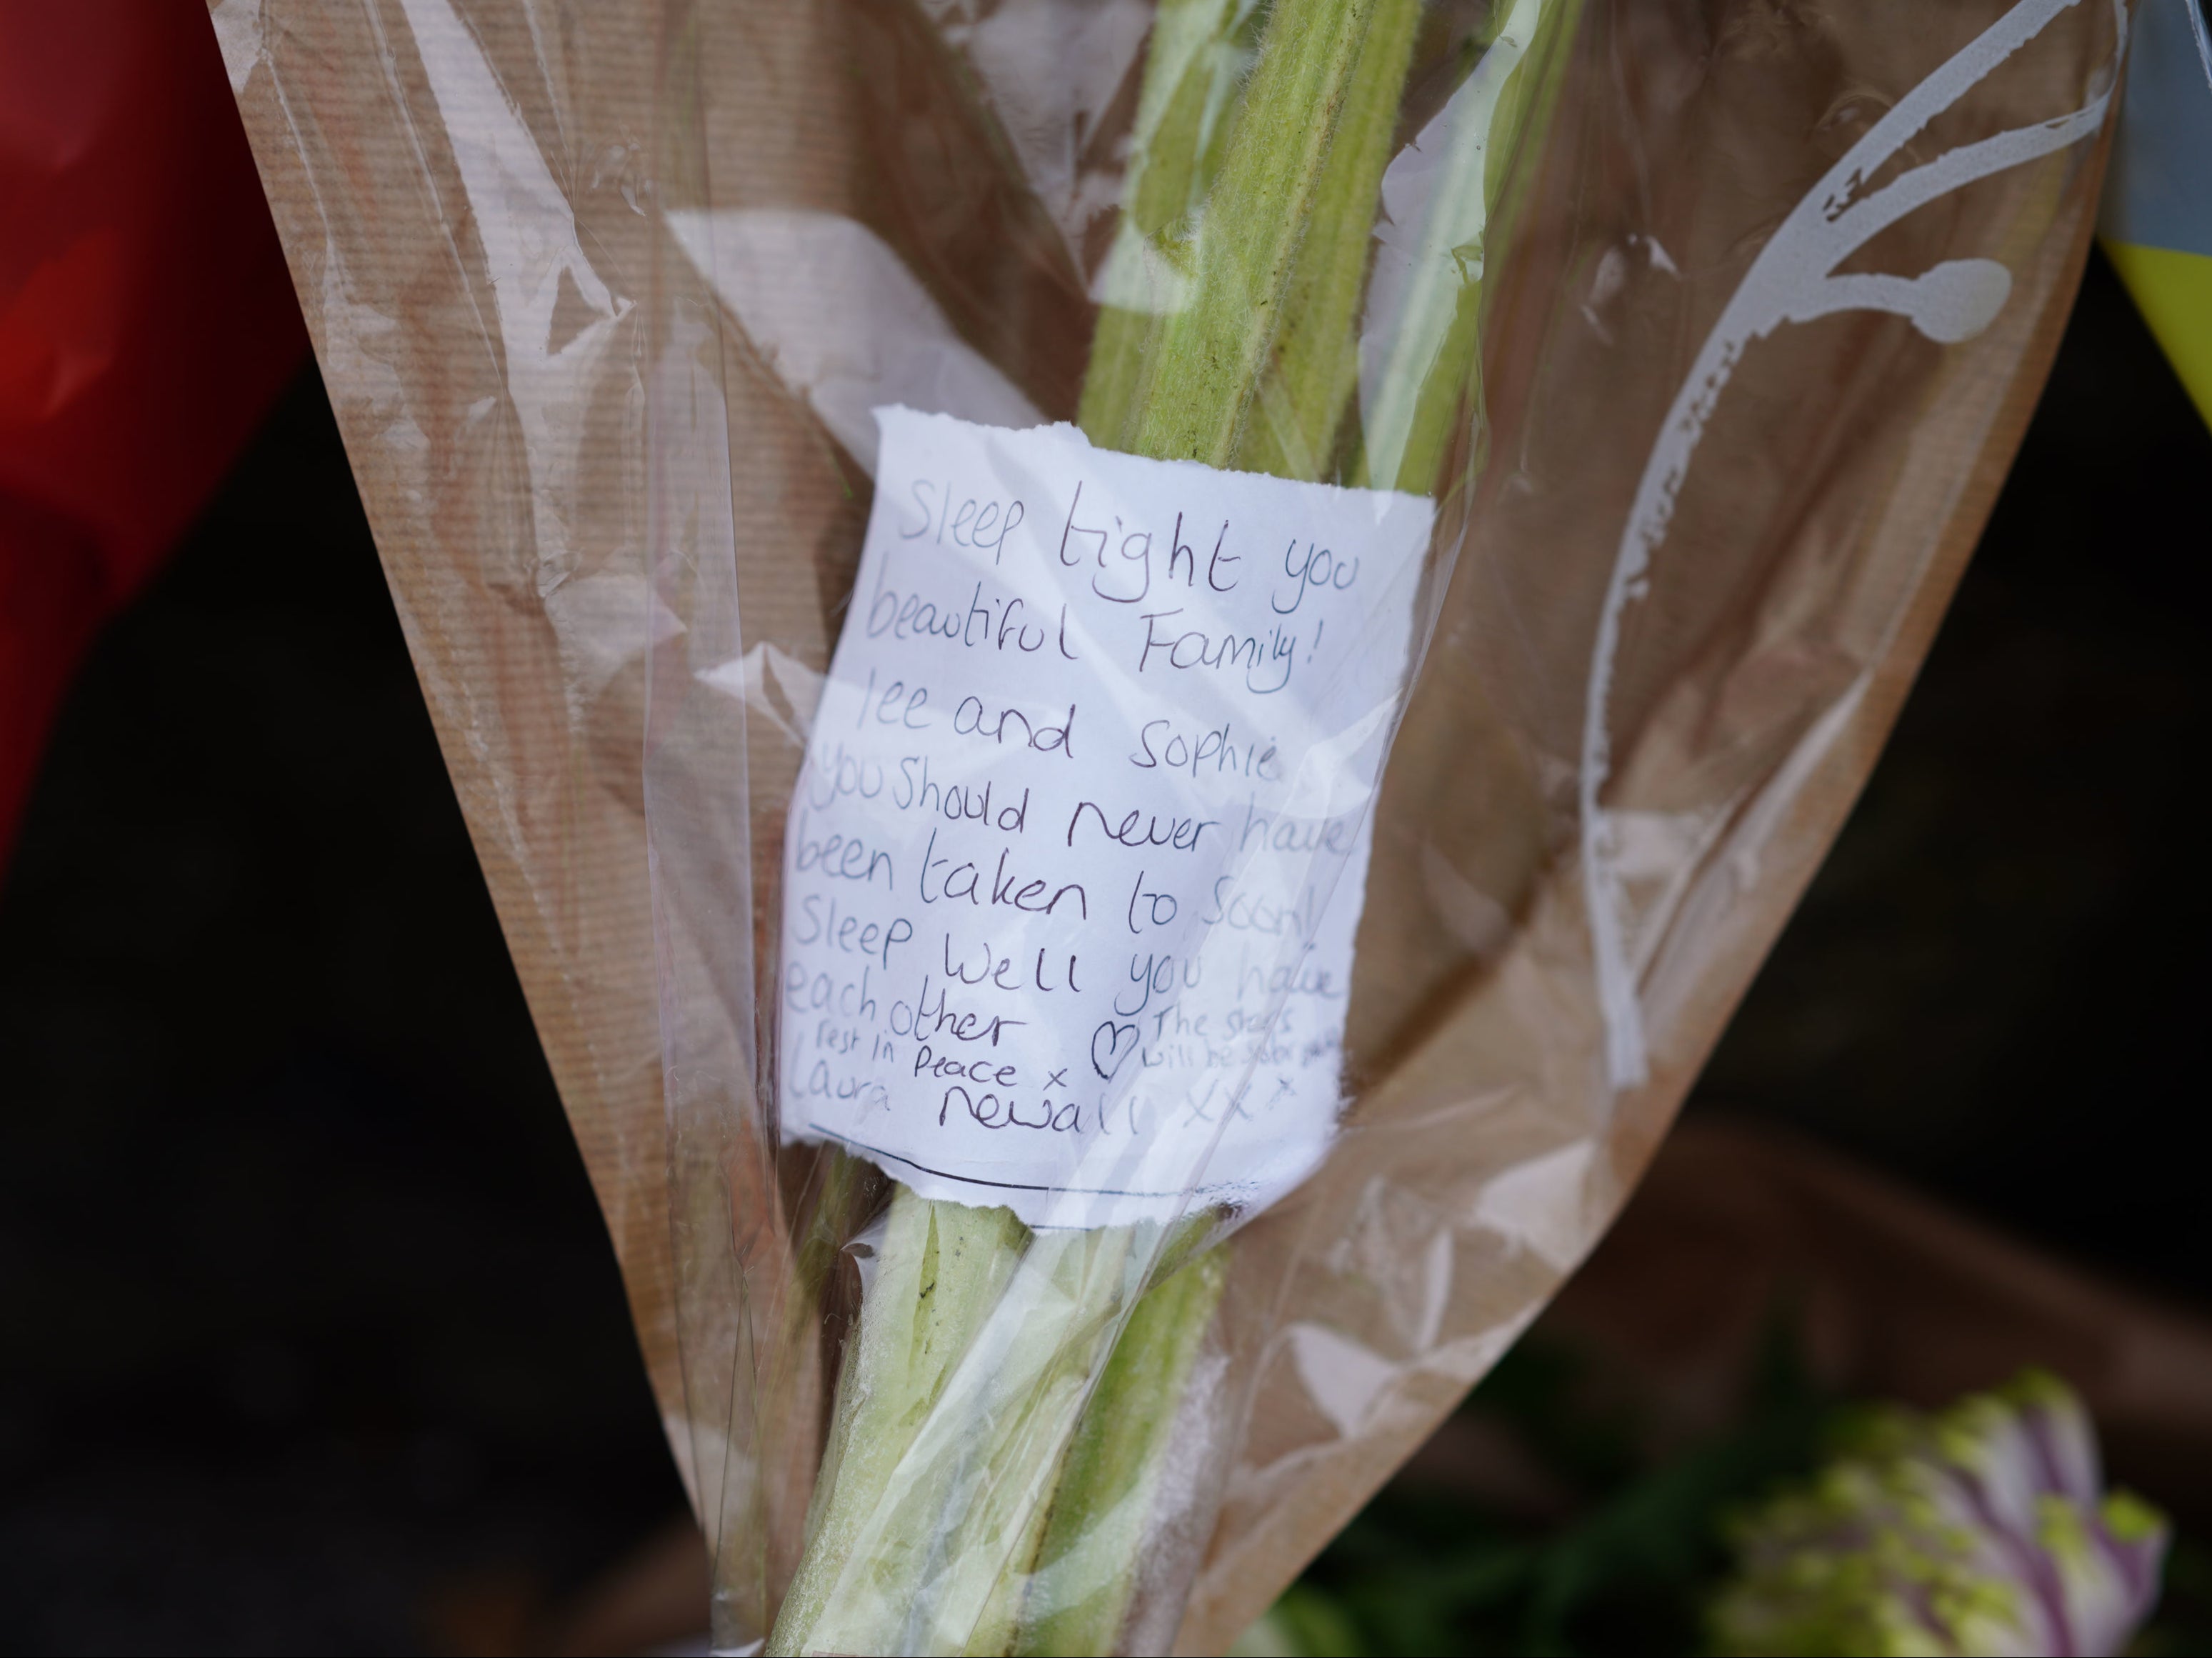 Floral tributes left in the Keyham area of Plymouth where six people, including the offender, died of gunshot wounds